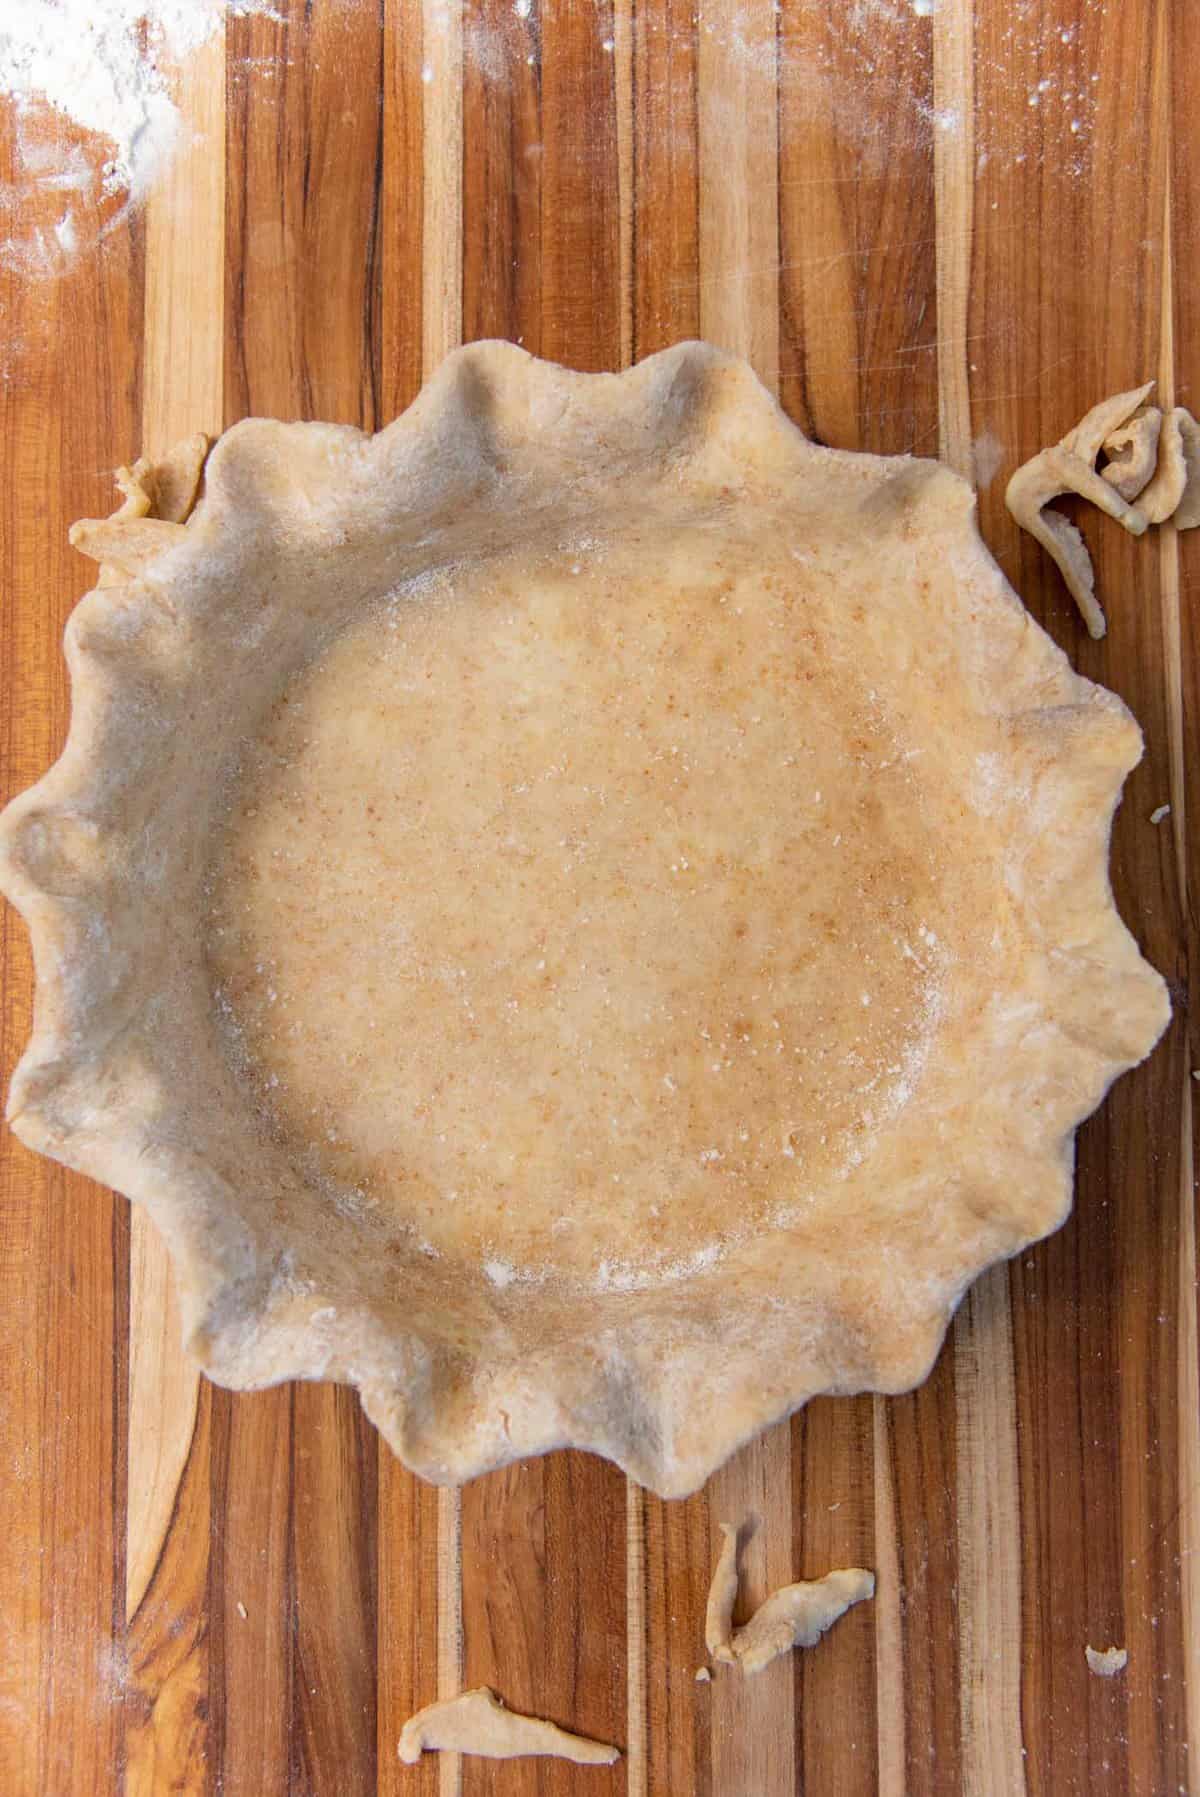 Overhead view of the pie crust with fluted edges.